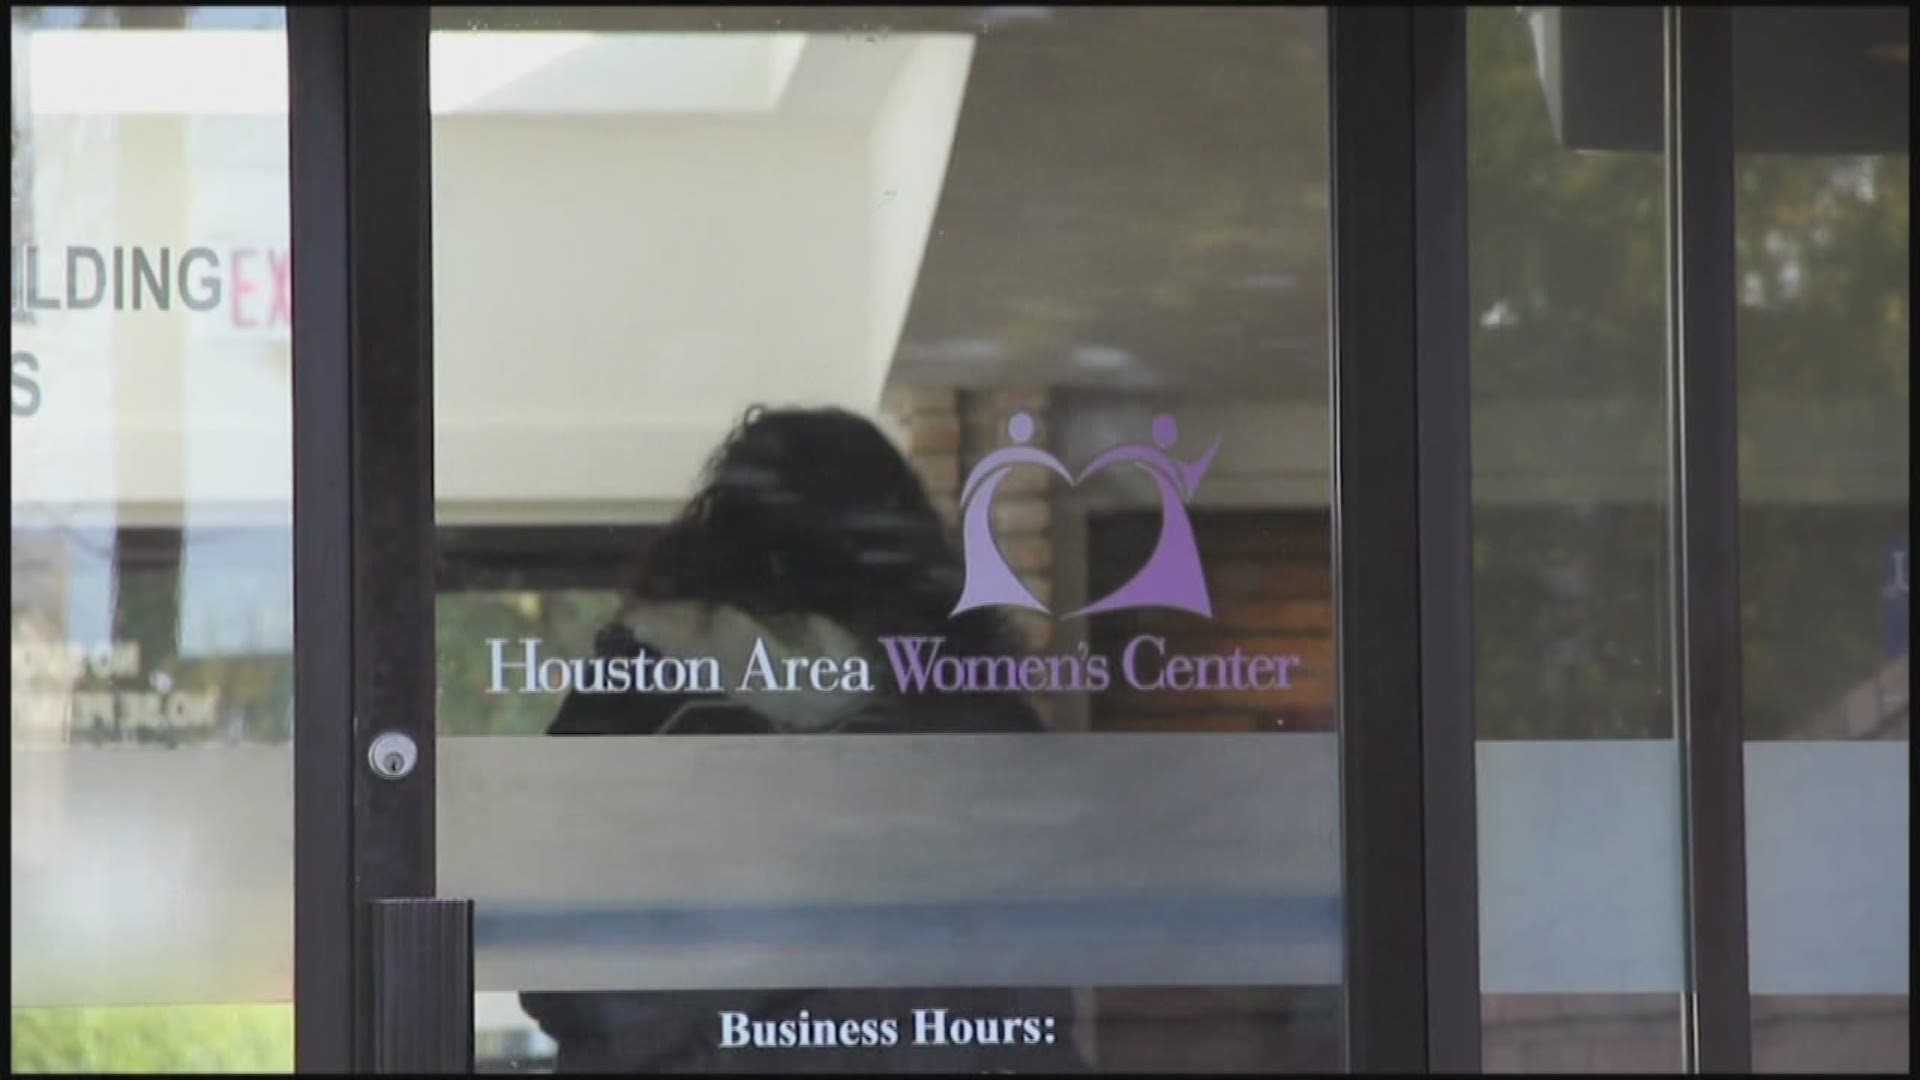 Year after year, Harris County leads the state in domestic violence homicides.